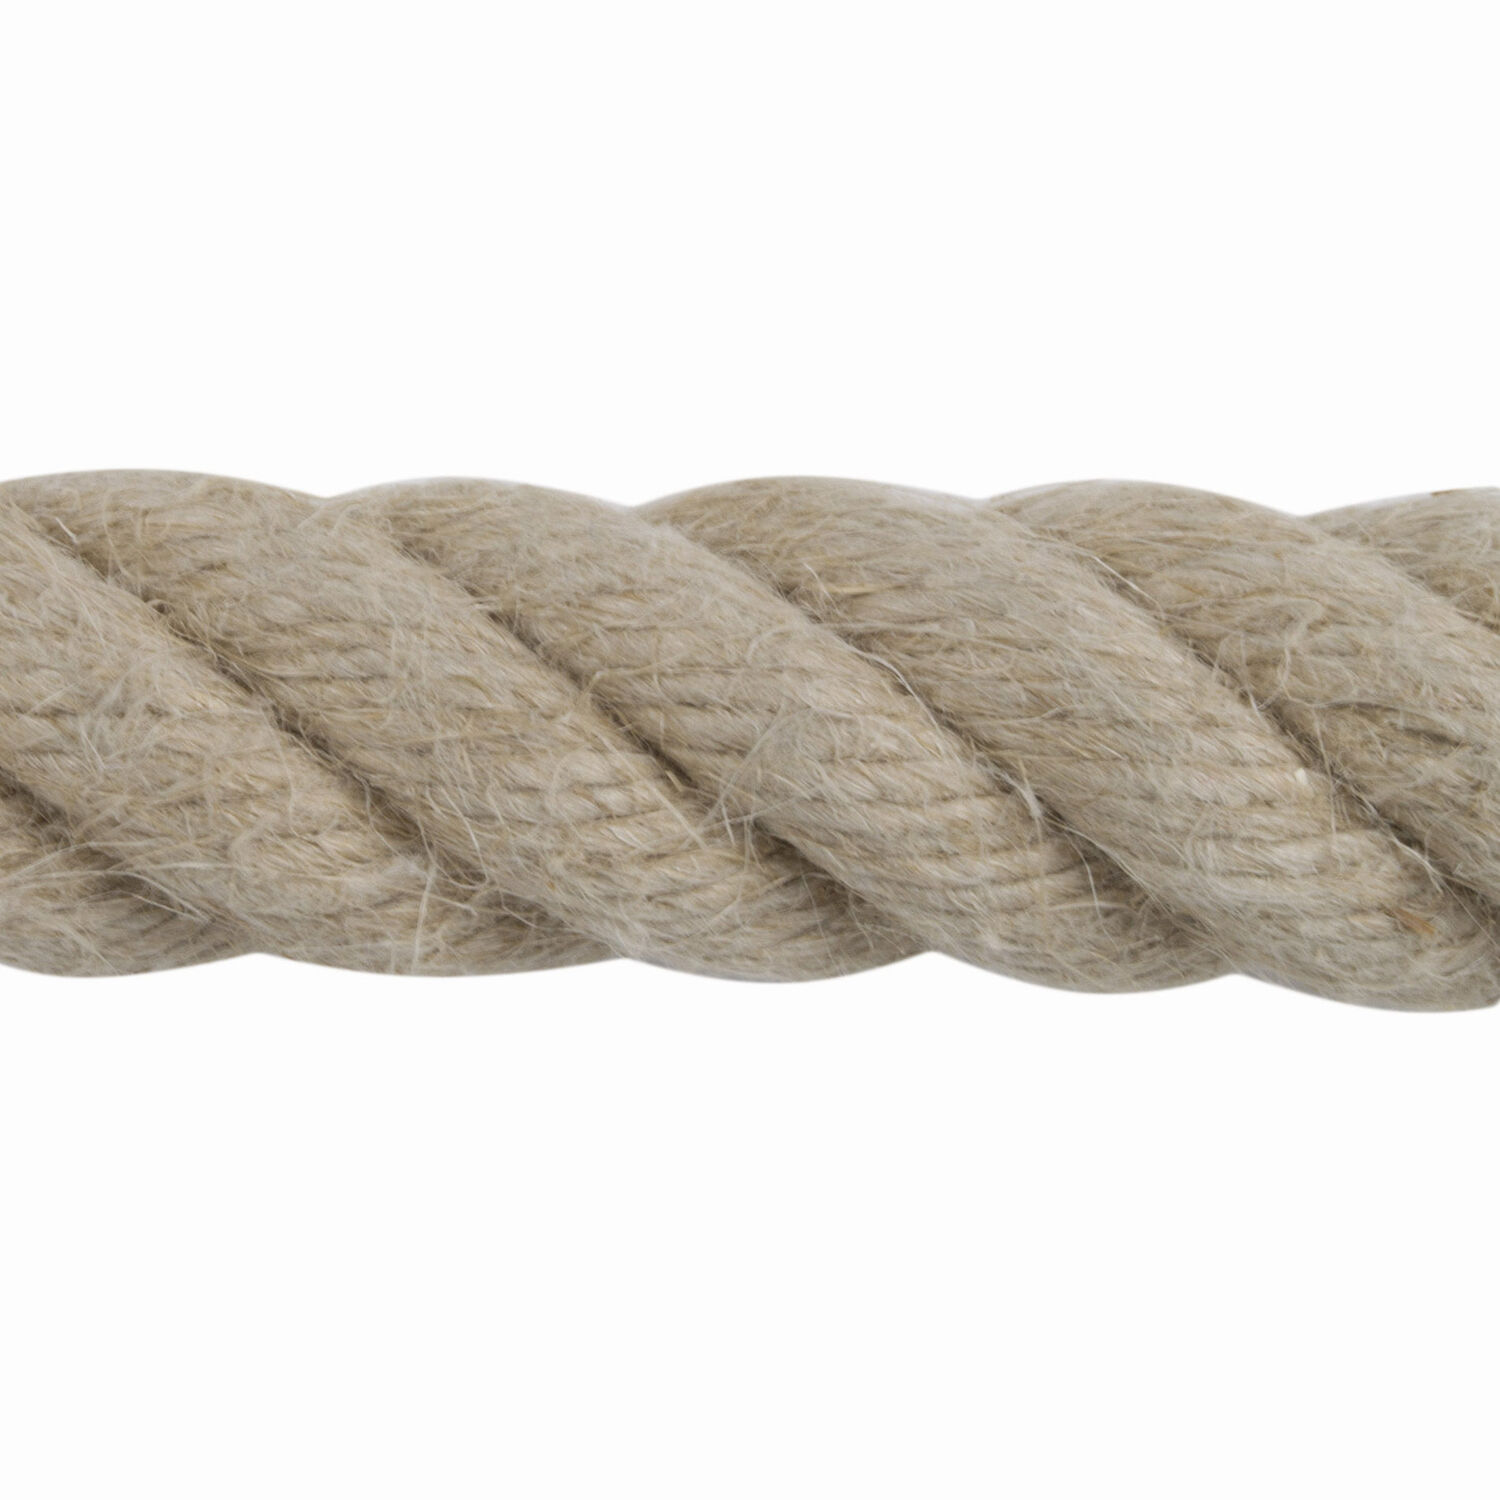 Hempex Synthetic Hemp Poly Hemp 25 MTS x 36MM Thick For Garden Decking Rope